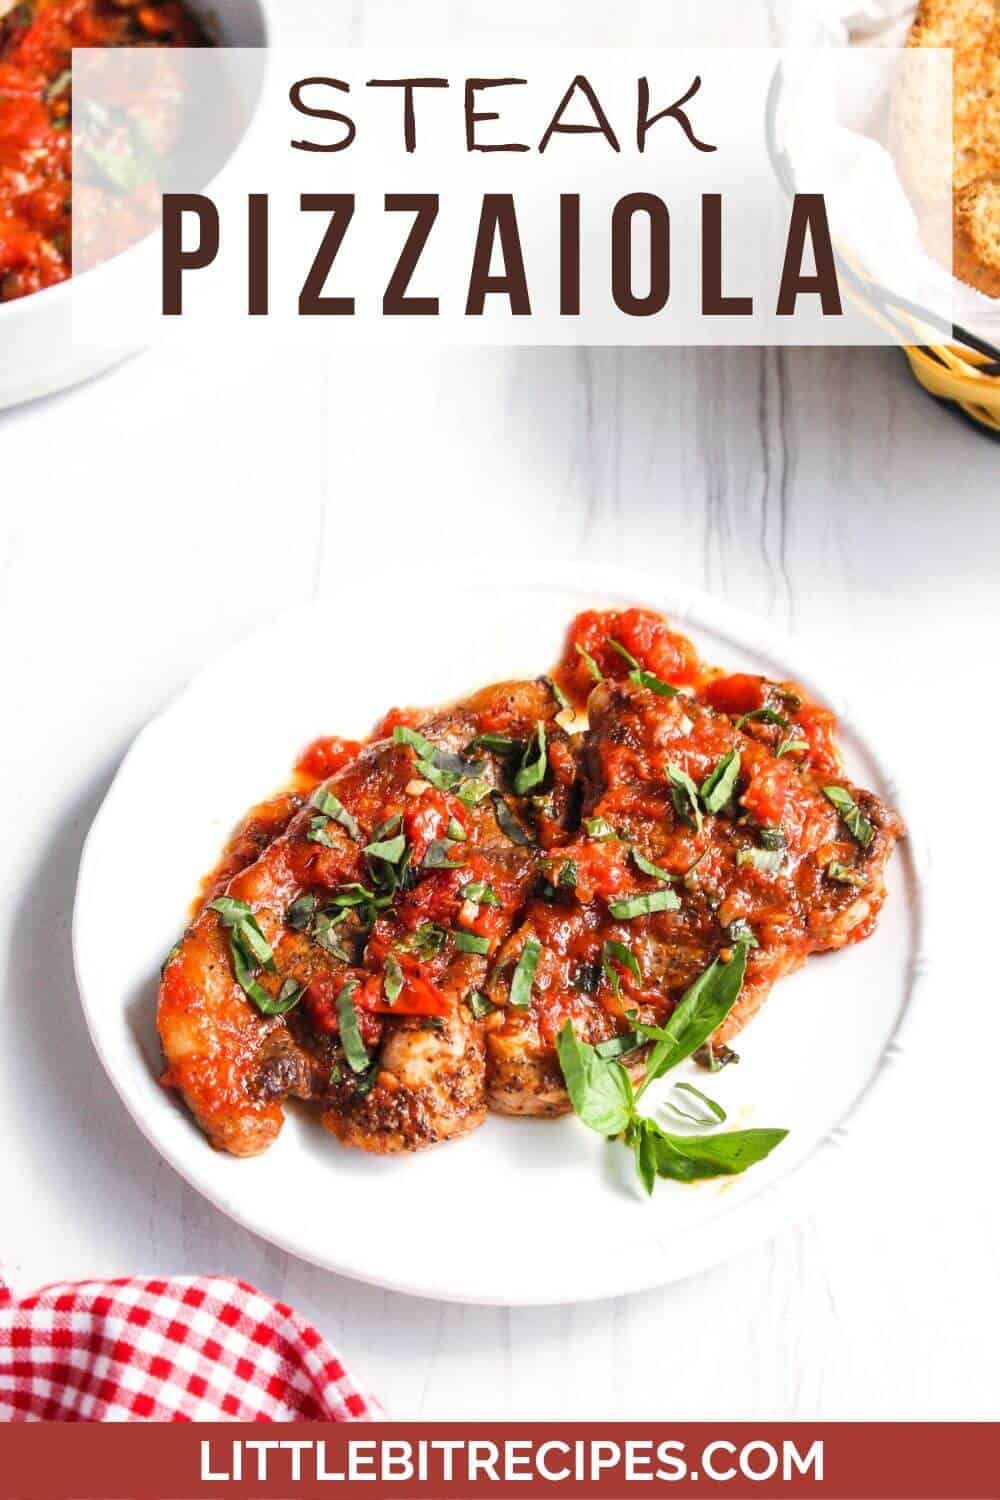 Steak pizzaiola on white plate with text.